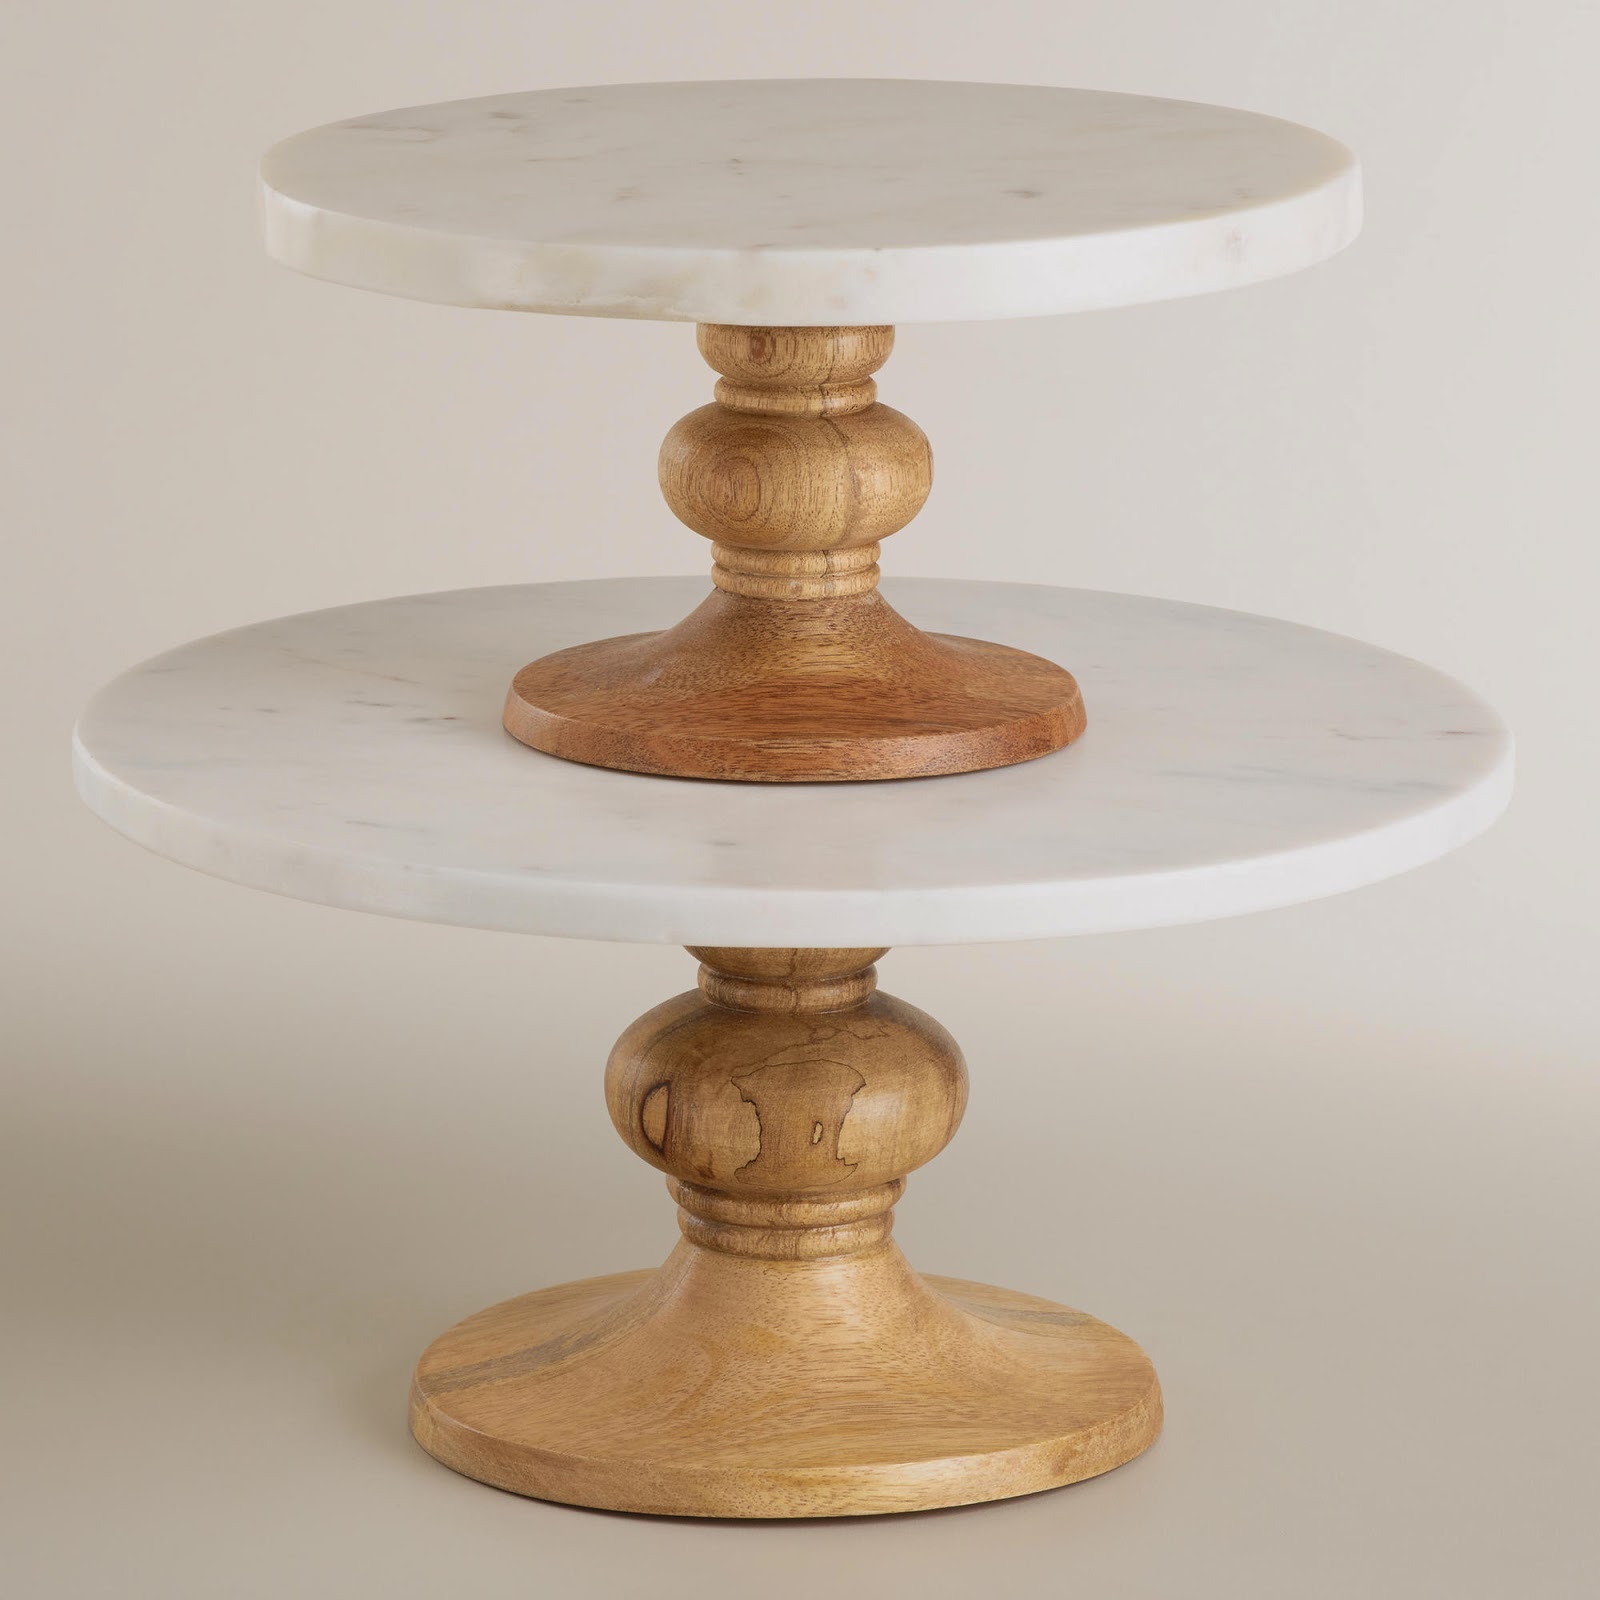 http://www.worldmarket.com/product/round+marble+and+wood+pedestal+stand.do